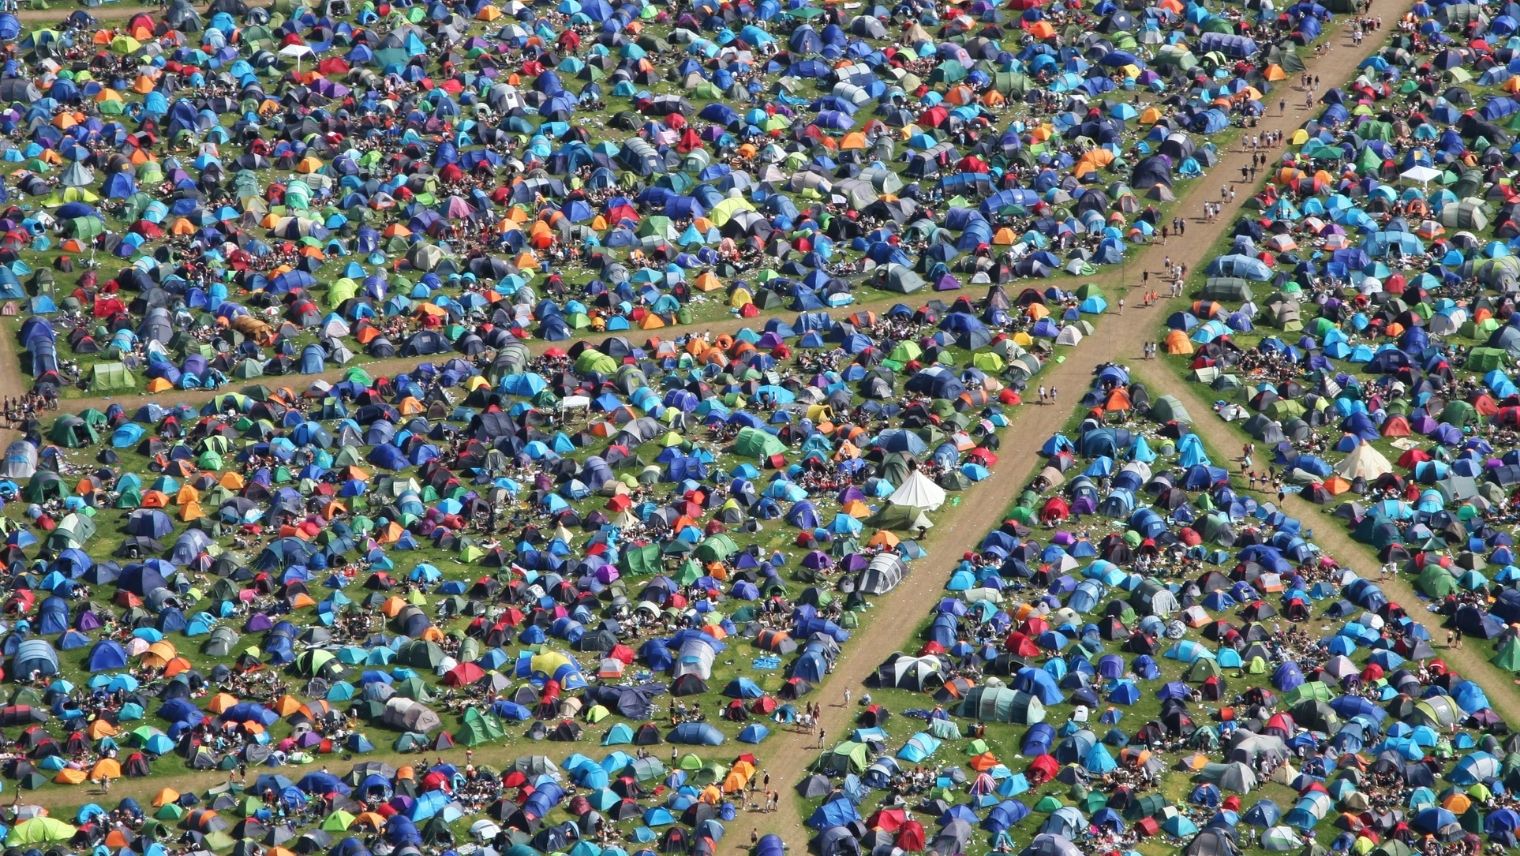 Field full of tents at a festival